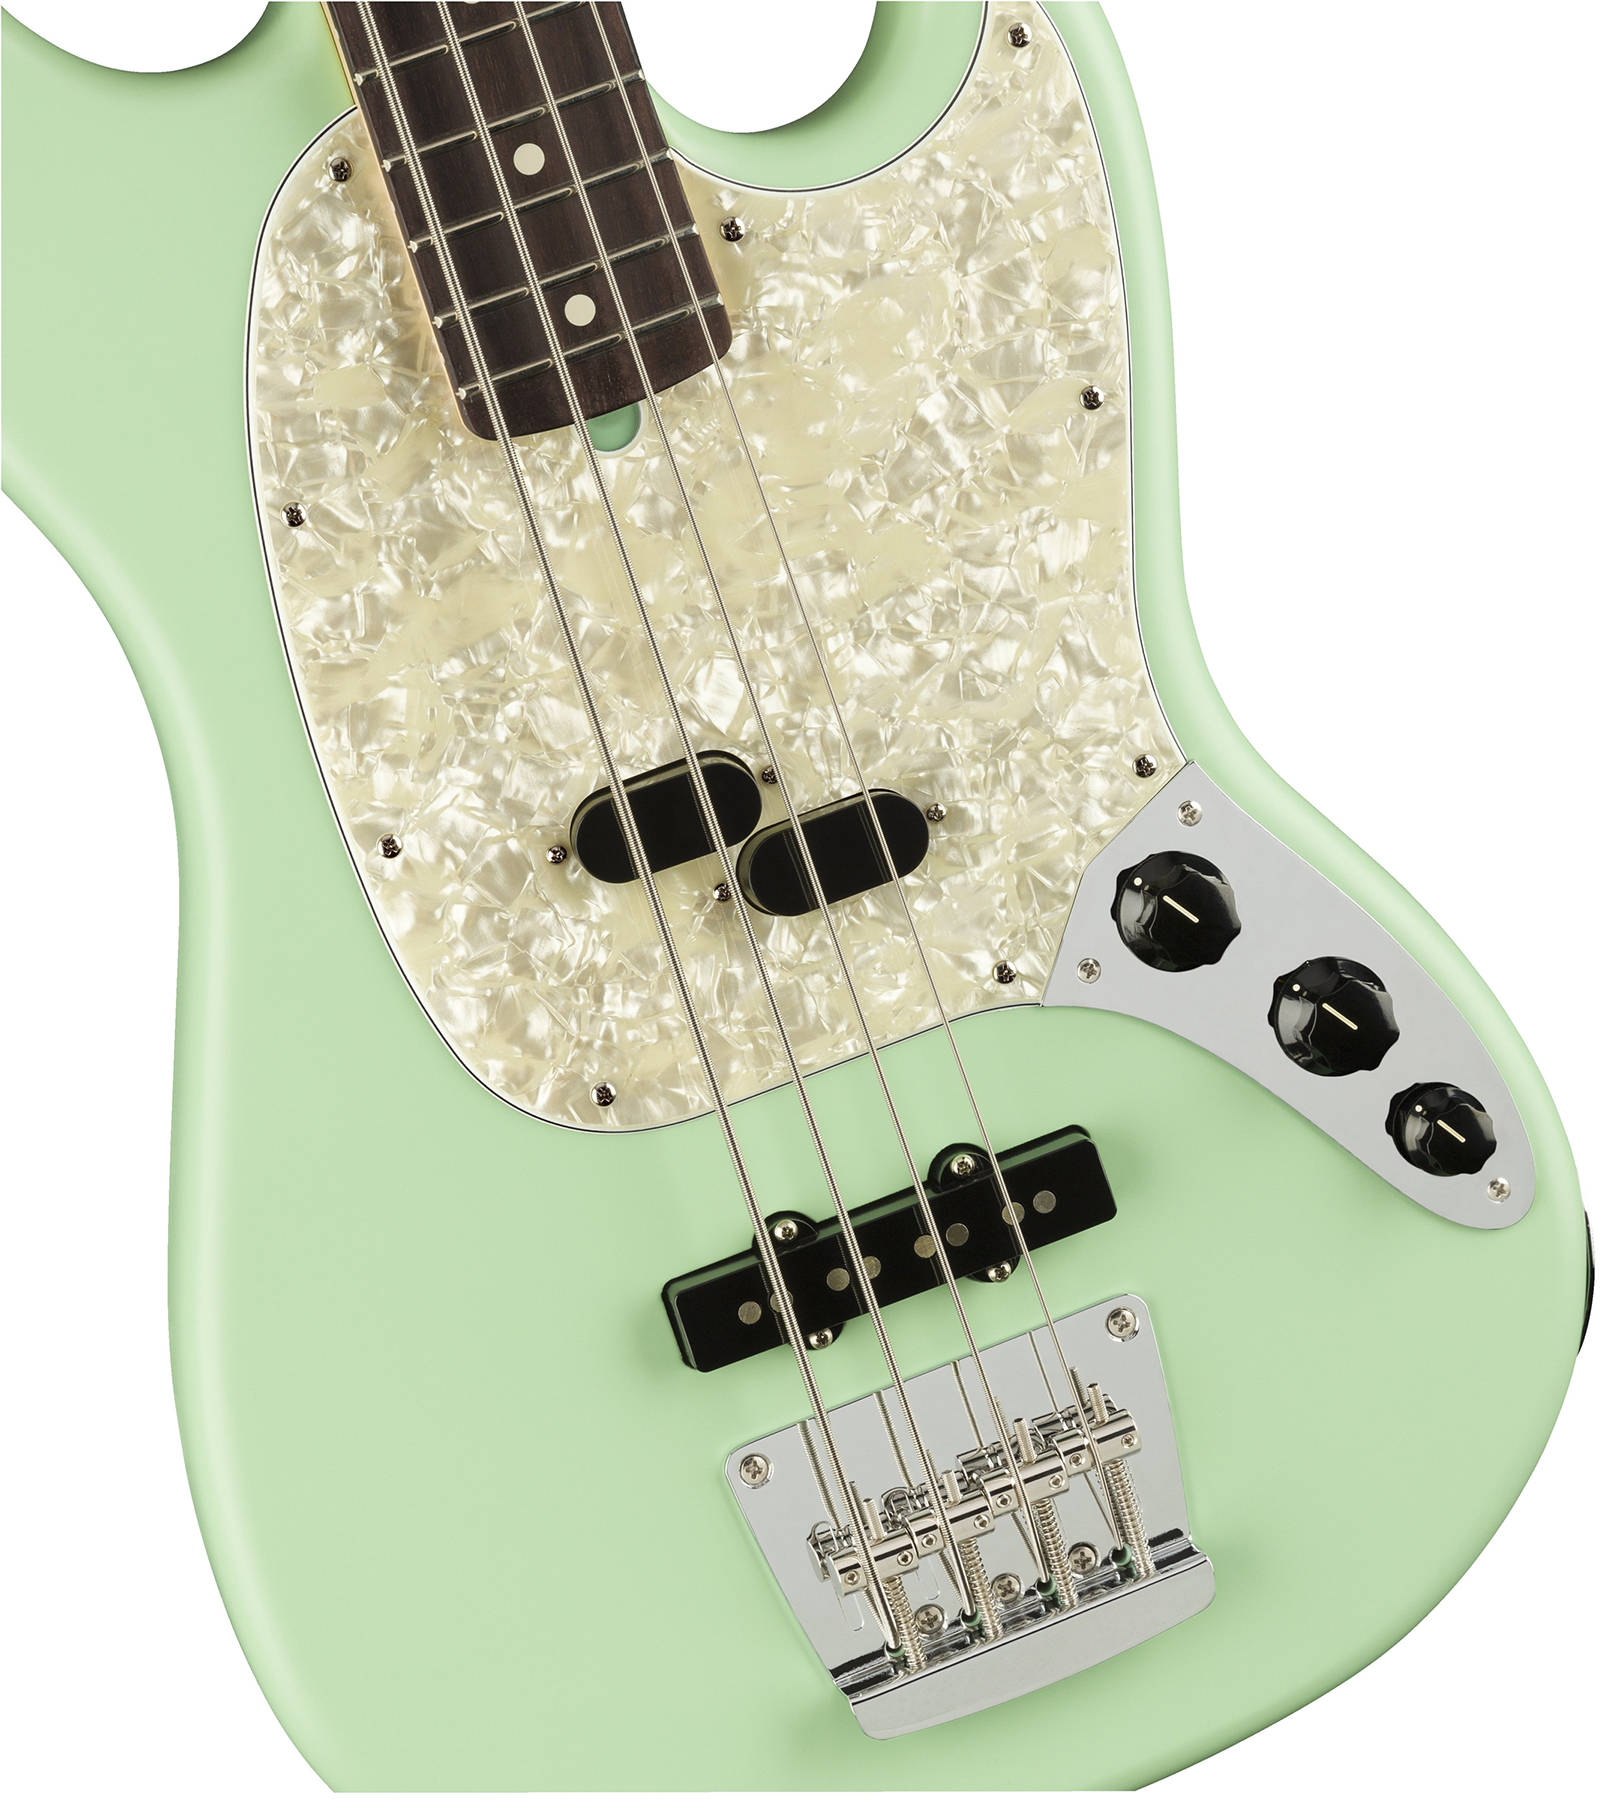 Fender Mustang Bass American Performer Usa Rw - Satin Surf Green - Electric bass for kids - Variation 2